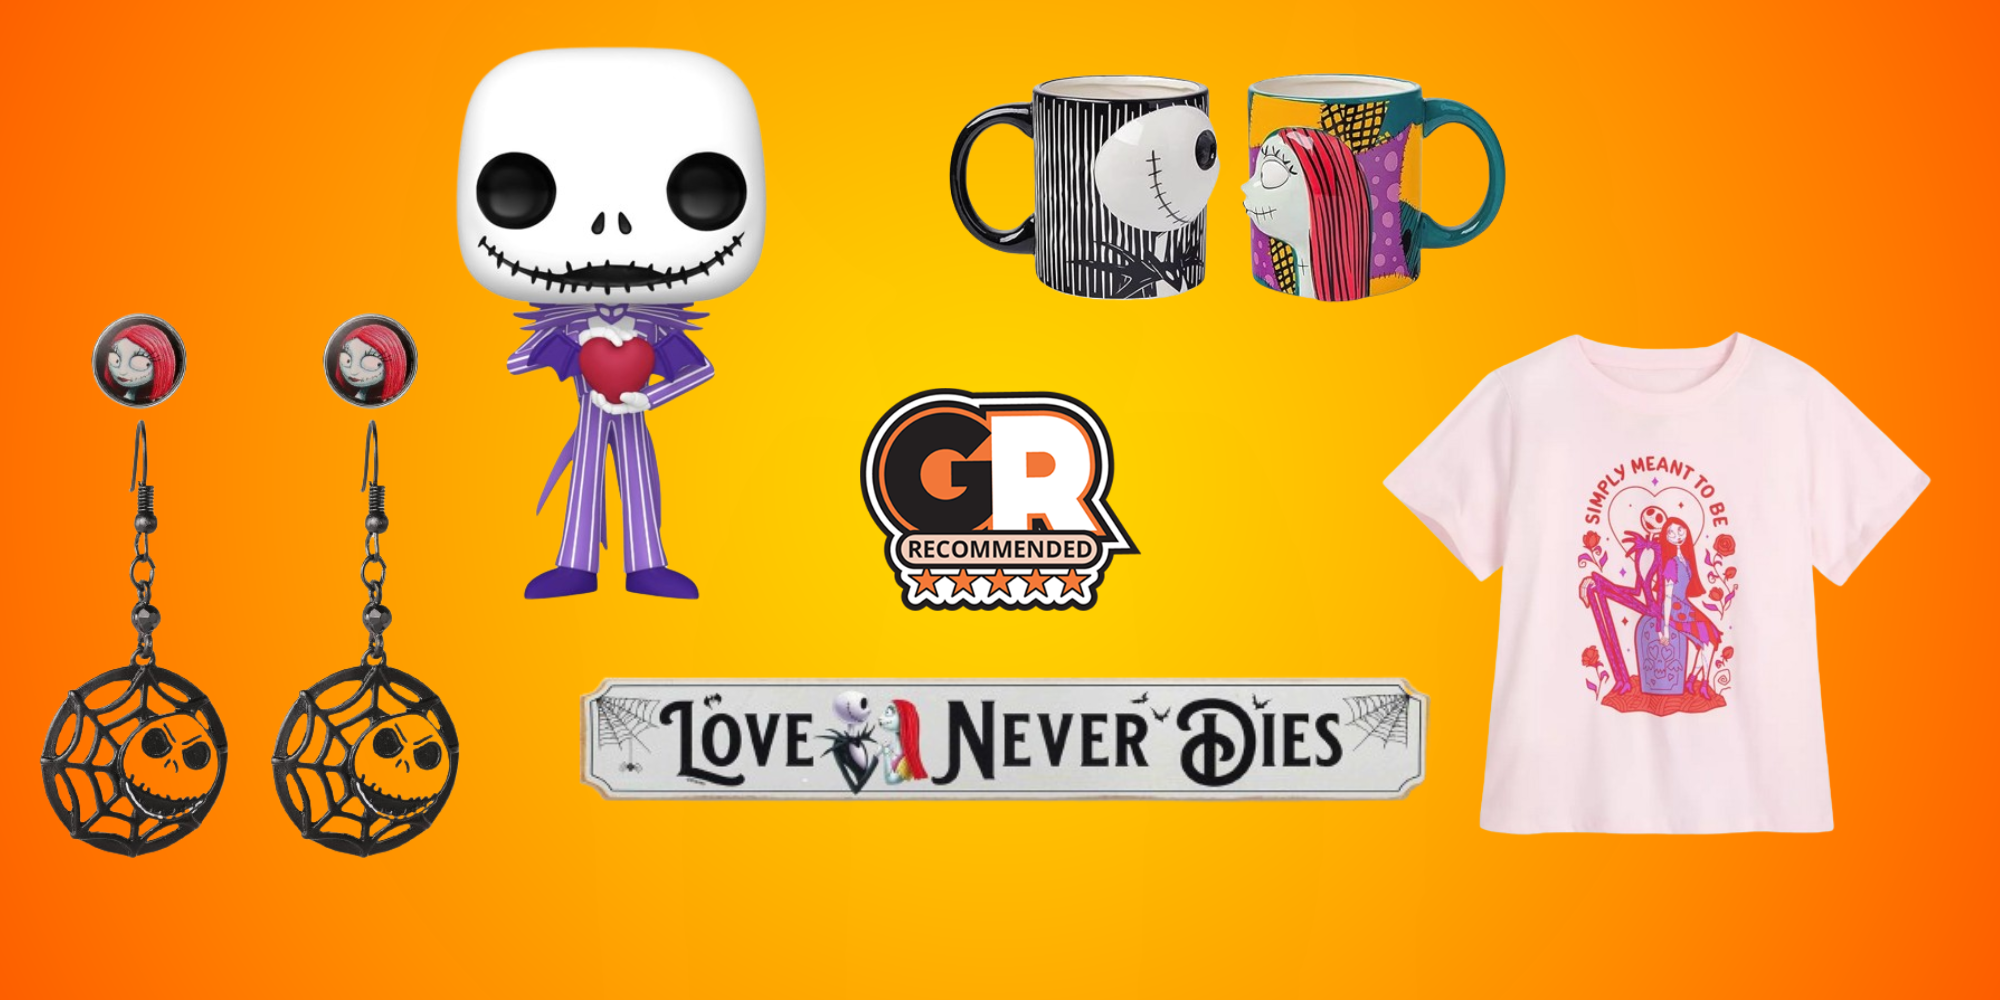 Feature image of Nightmare Before Christmas merch